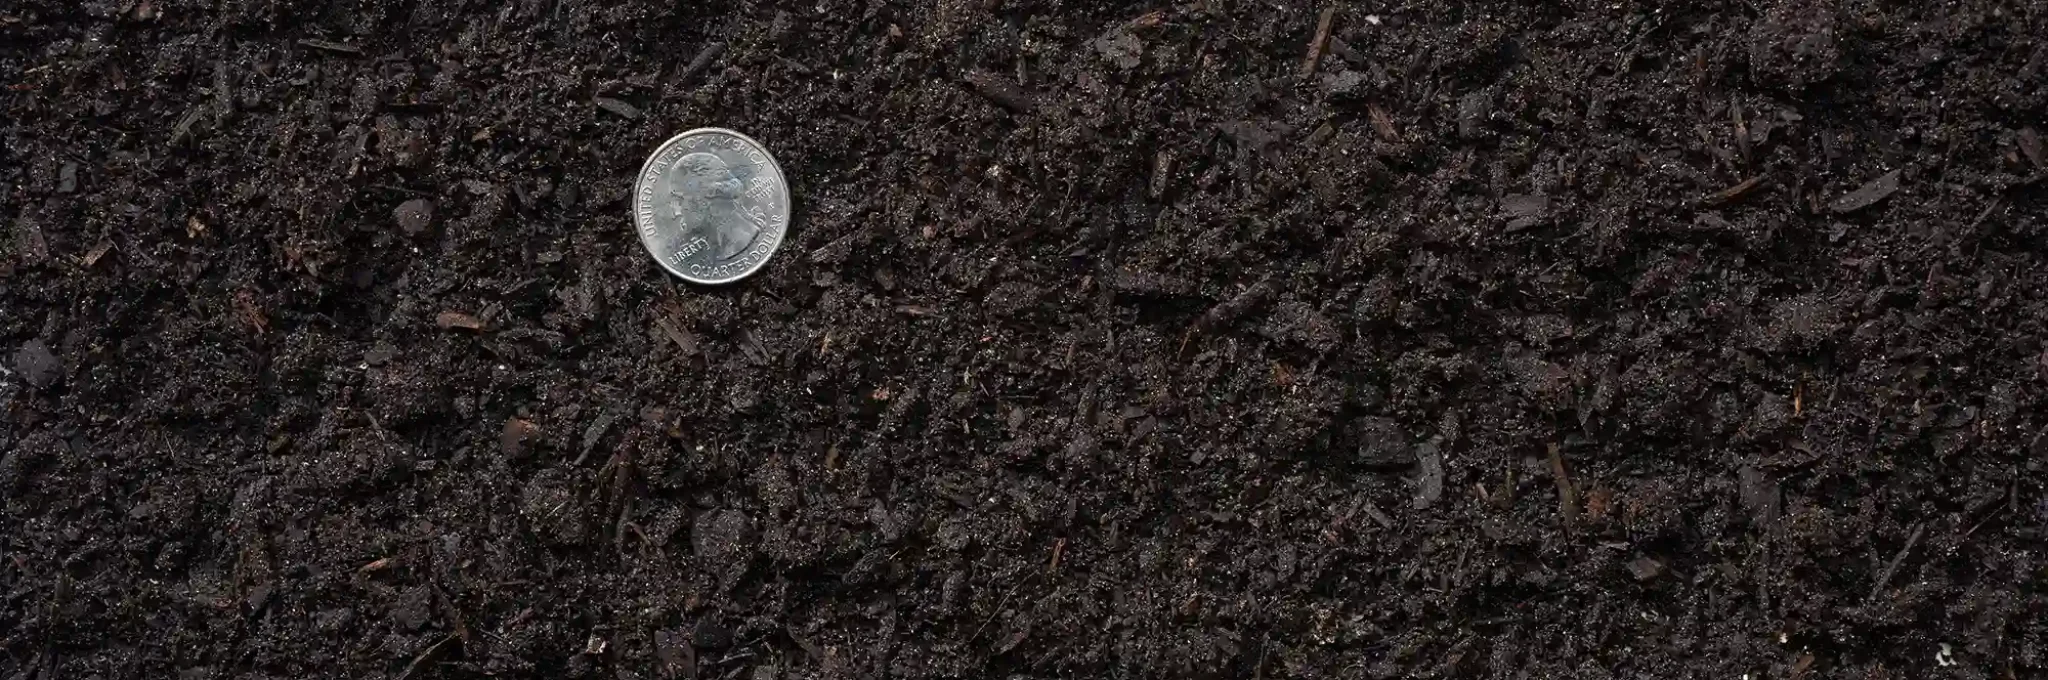 A close-up view of COMAND Turf Professional-Grade Microbial Compost showing a U.S. quarter for scale.